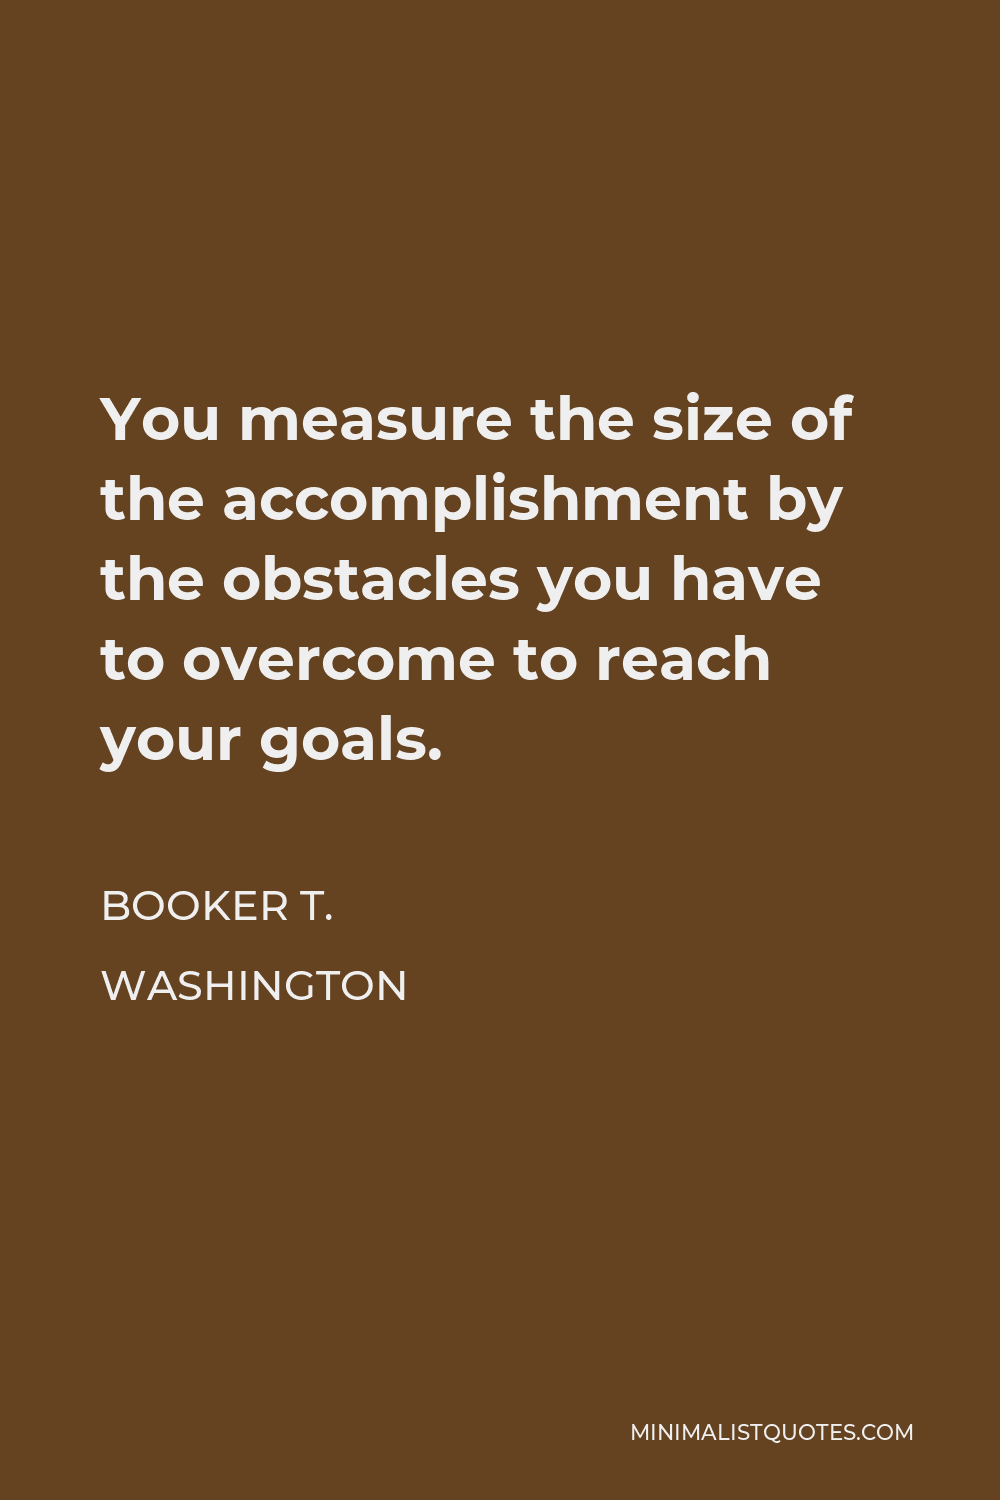 Booker T. Washington Quote - You measure the size of the accomplishment by the obstacles you have to overcome to reach your goals.